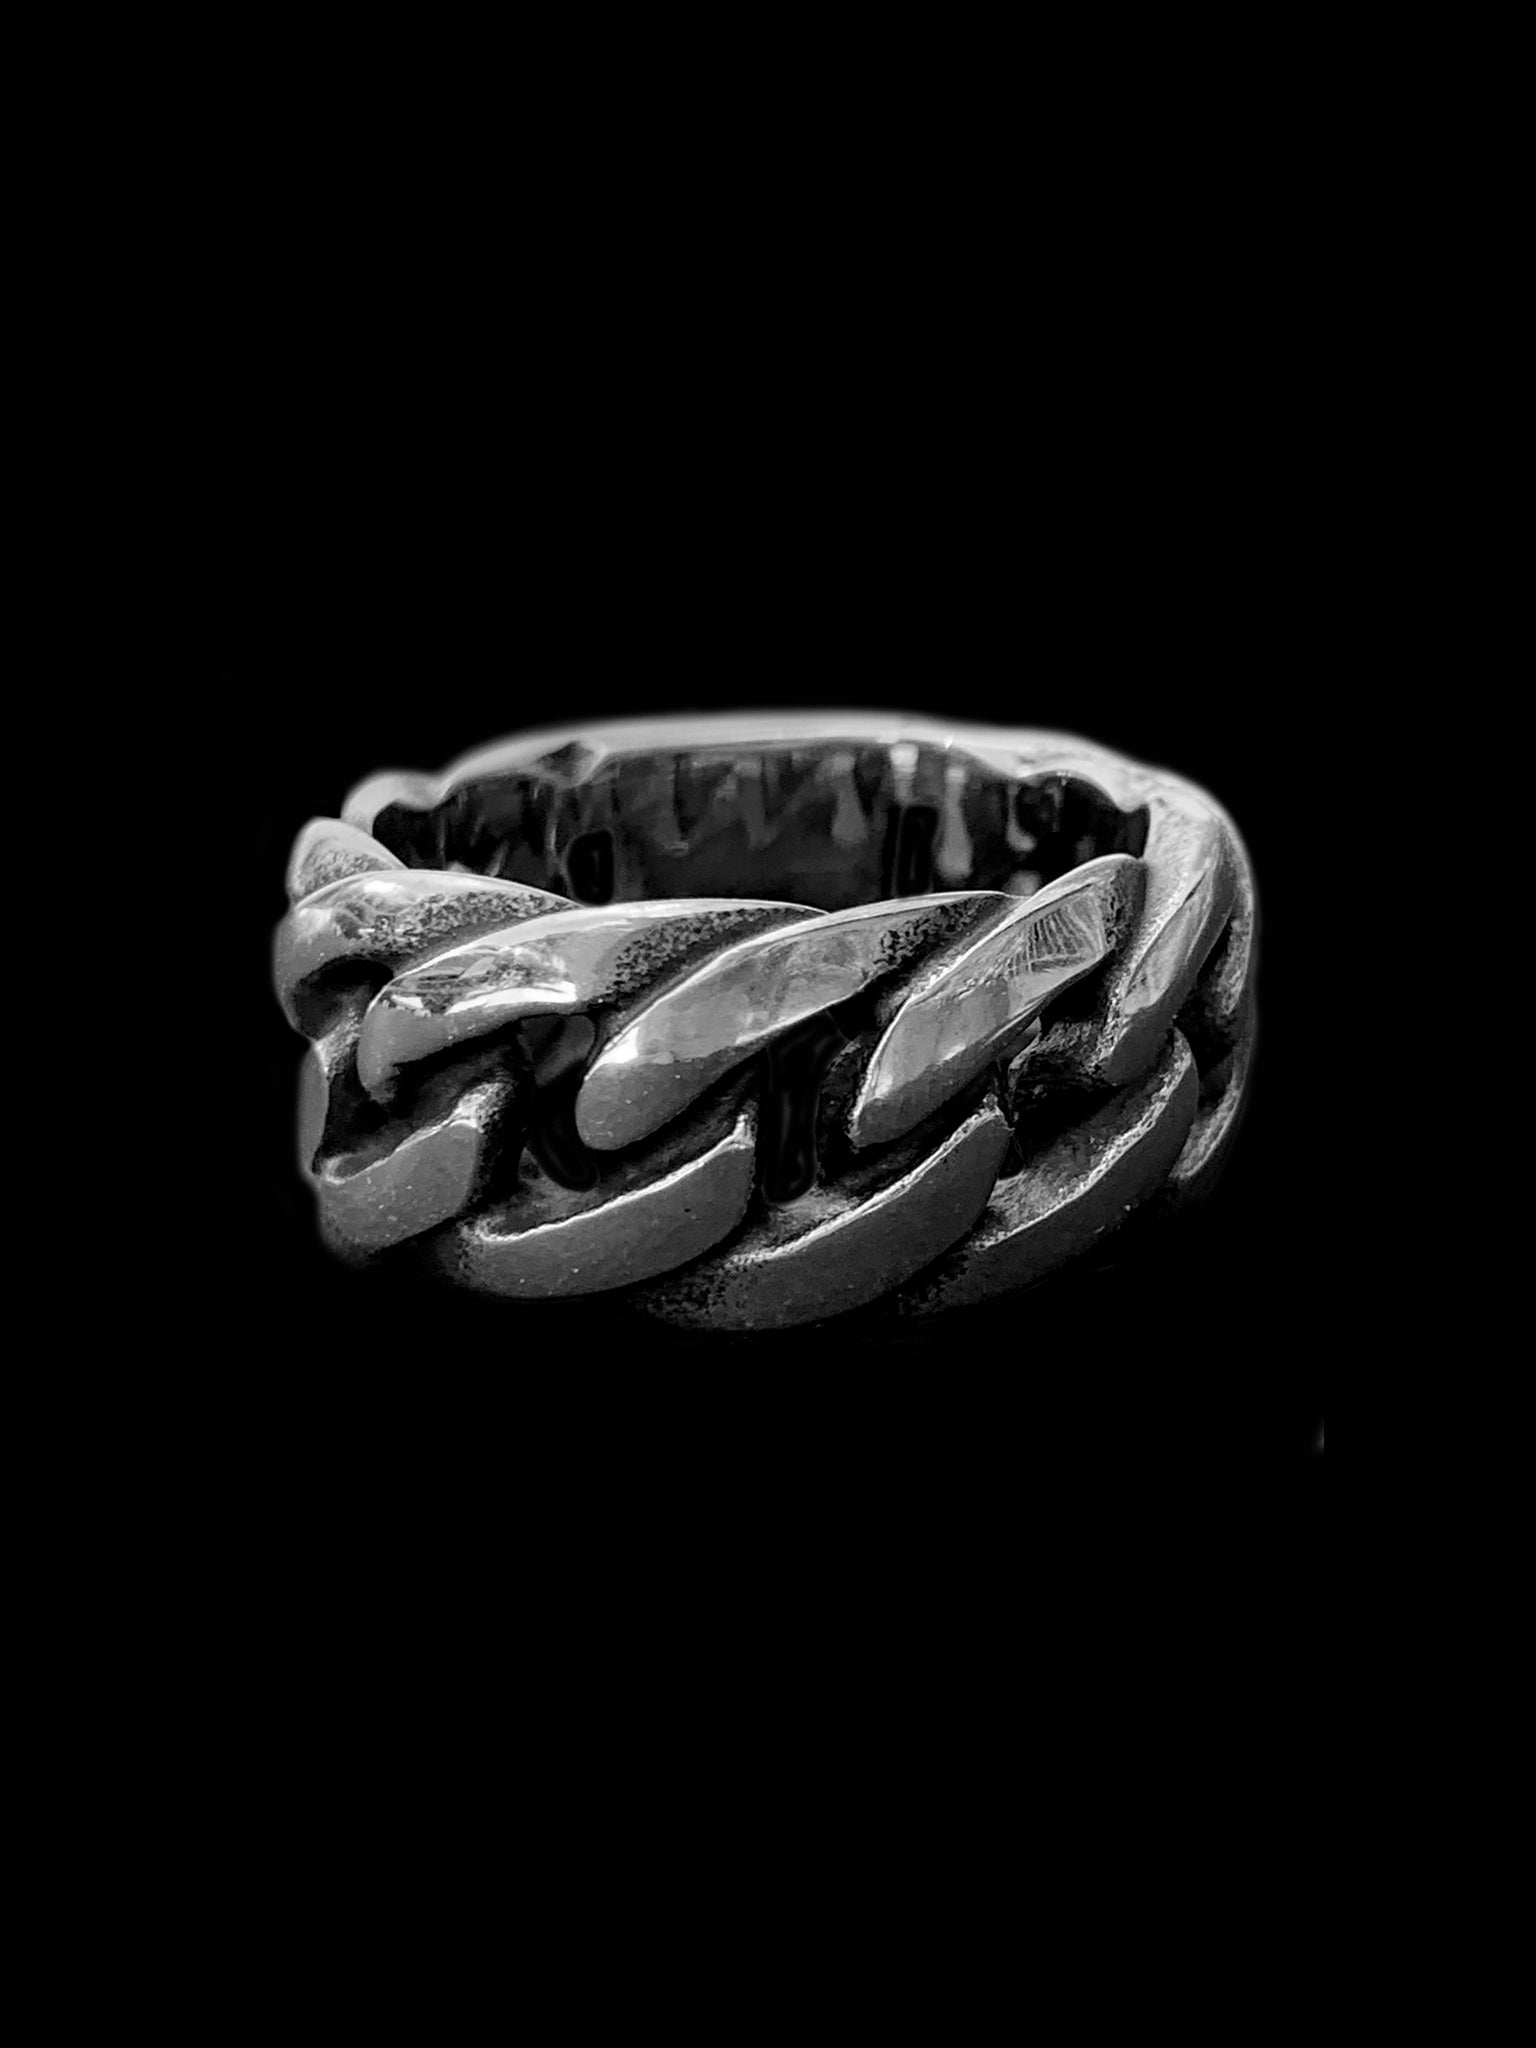 Chain Of Fools Ring